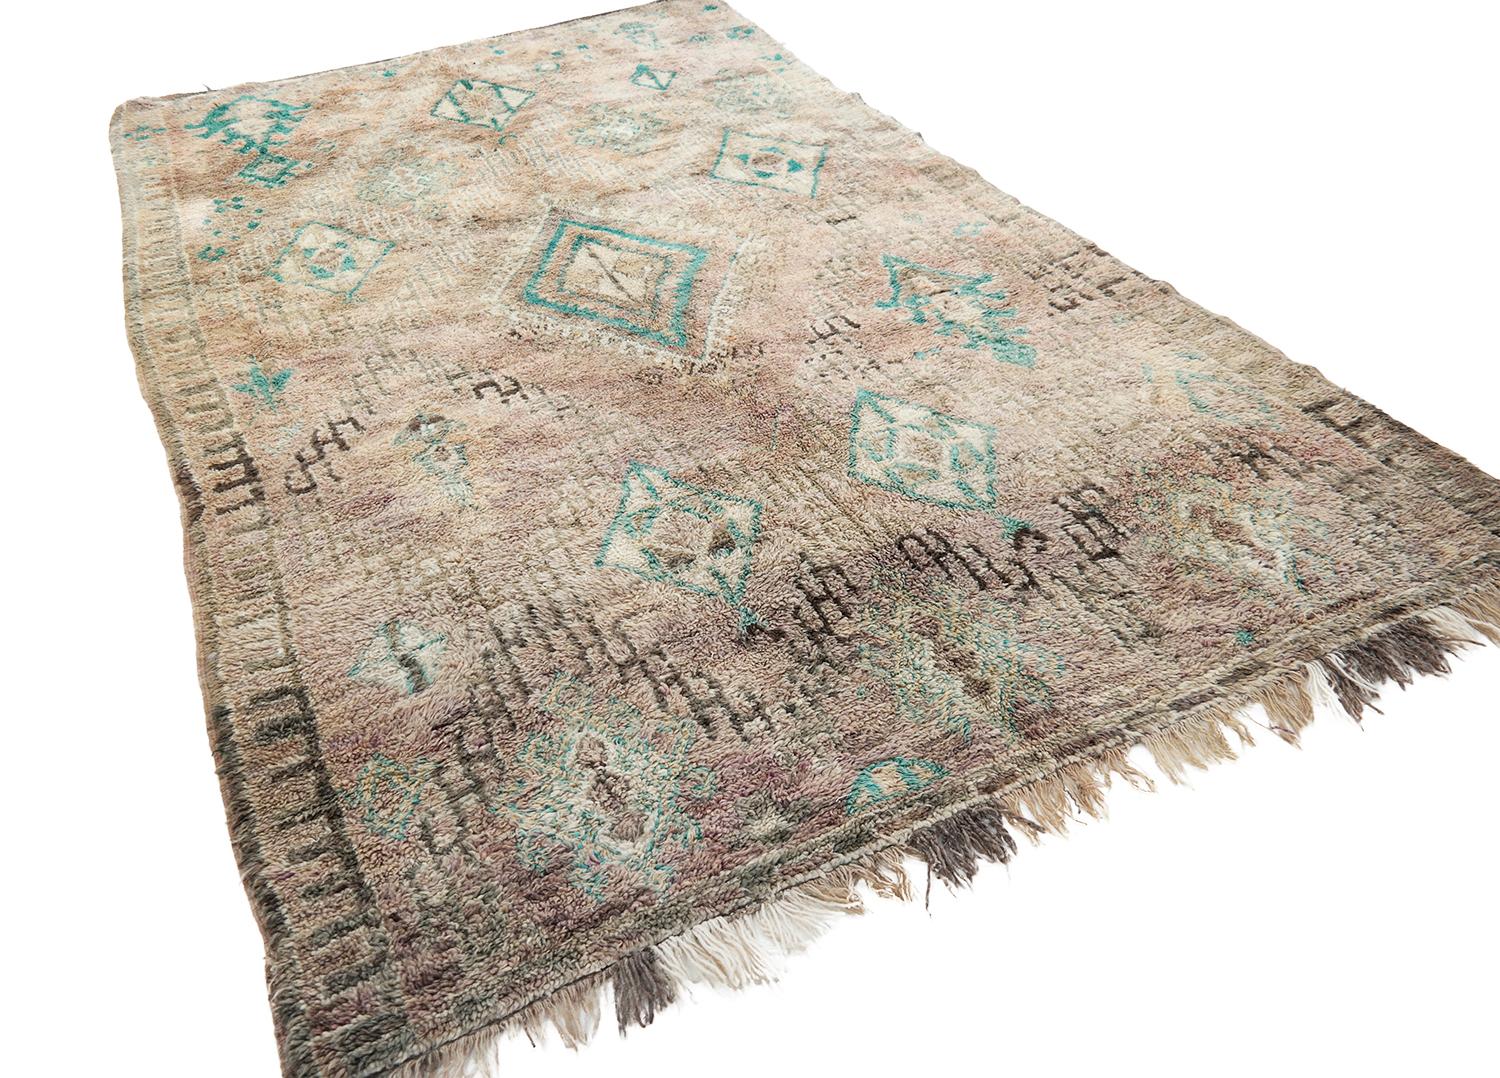 This rug is the beauty of the beauties. The most pretty color shades and with beautiful made Berber symbols. She feels very soft and luxury under your feet. Depending the light you see different shades of aubergine, beige, sand, purple, brown and